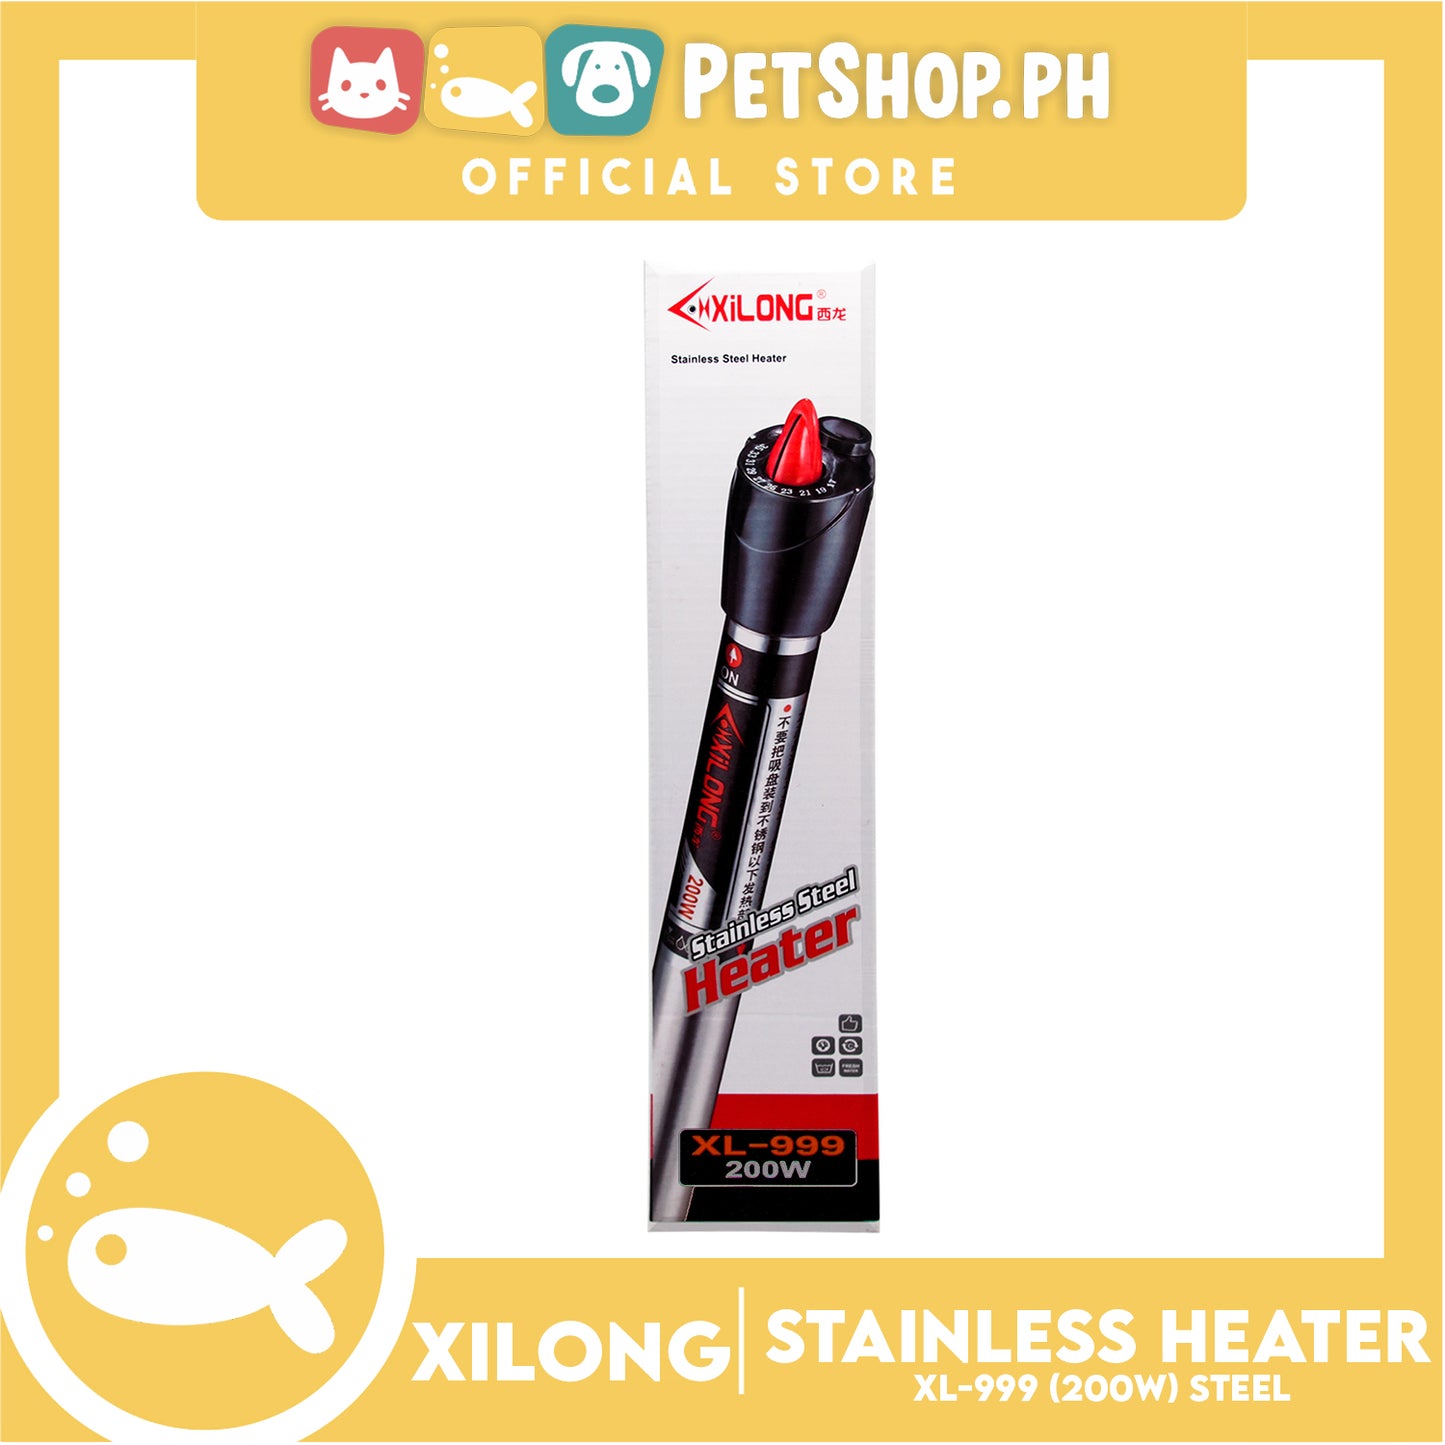 XL-999 Stainless Heater 200w